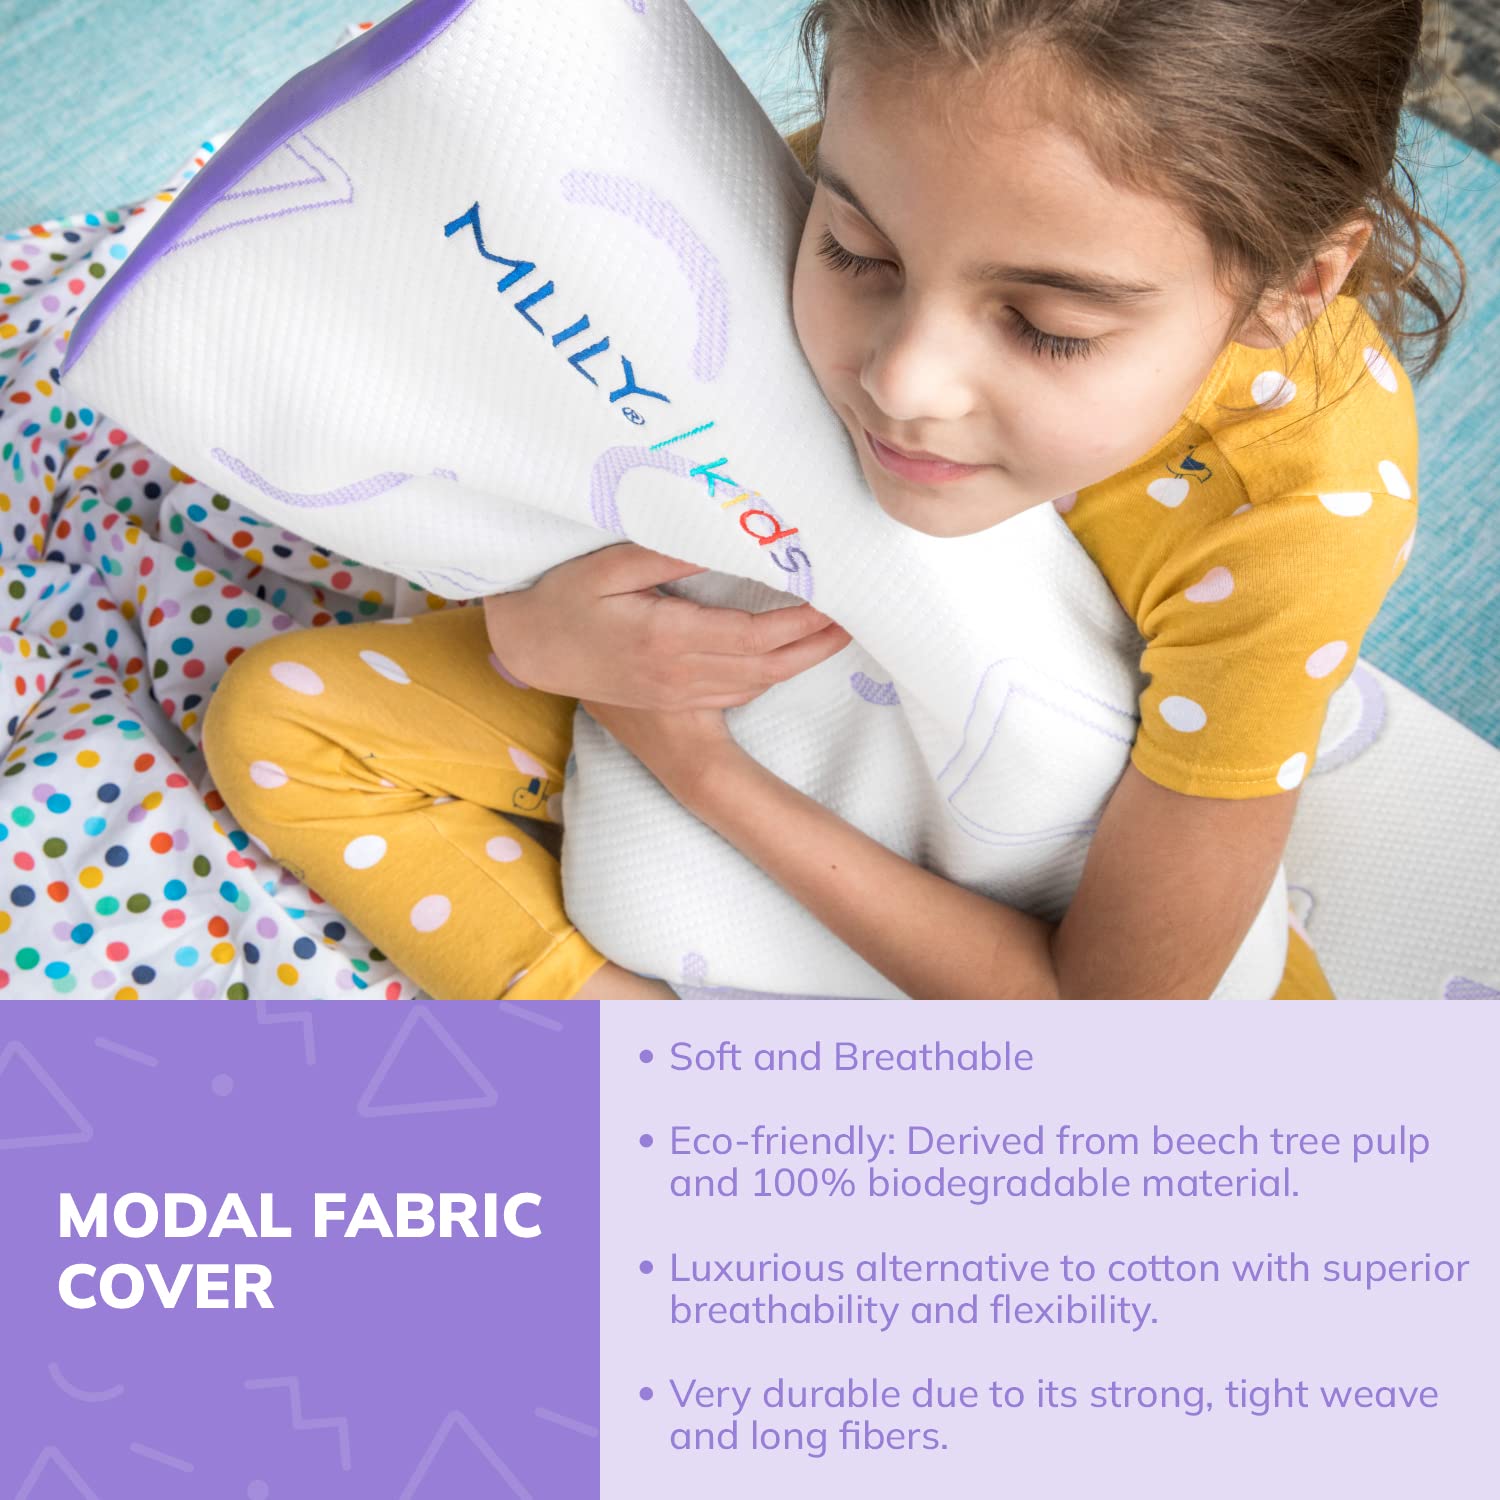 MLILY Kids Pillow for Sleeping, Adjustable Kids Memory Foam Pillow for Bed Set, Breathable and Cooling Pillows for Kids Boy Girl, CertiPUR-US Certified, 12x20 Inch, Purple